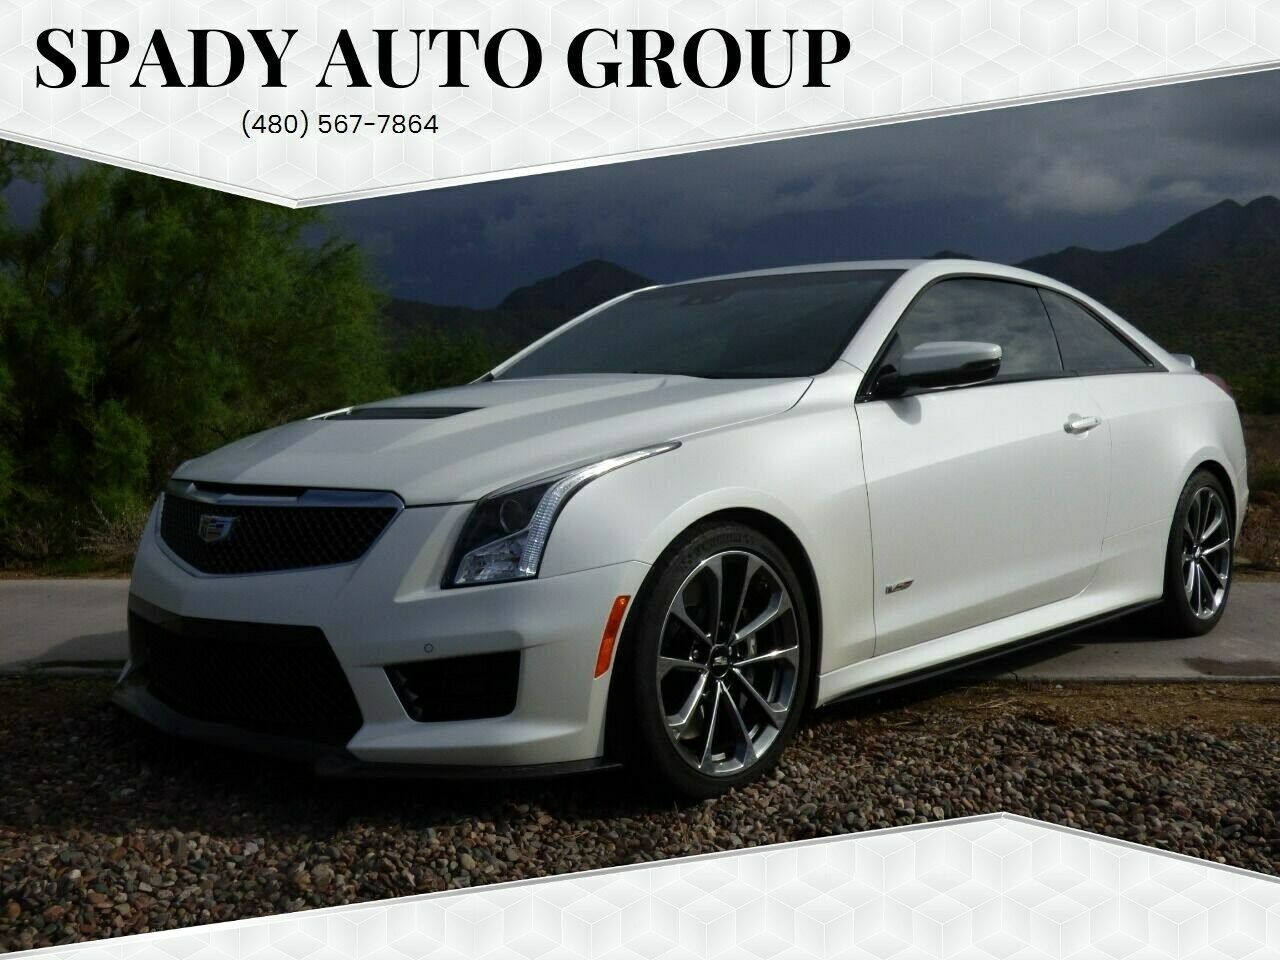 2016 Cadillac Ats Base 2dr Coupe 2016 Cadillac Ats-v Base 2dr Coupe 14,986 Miles Crystal White Frost Coupe 3.6l V